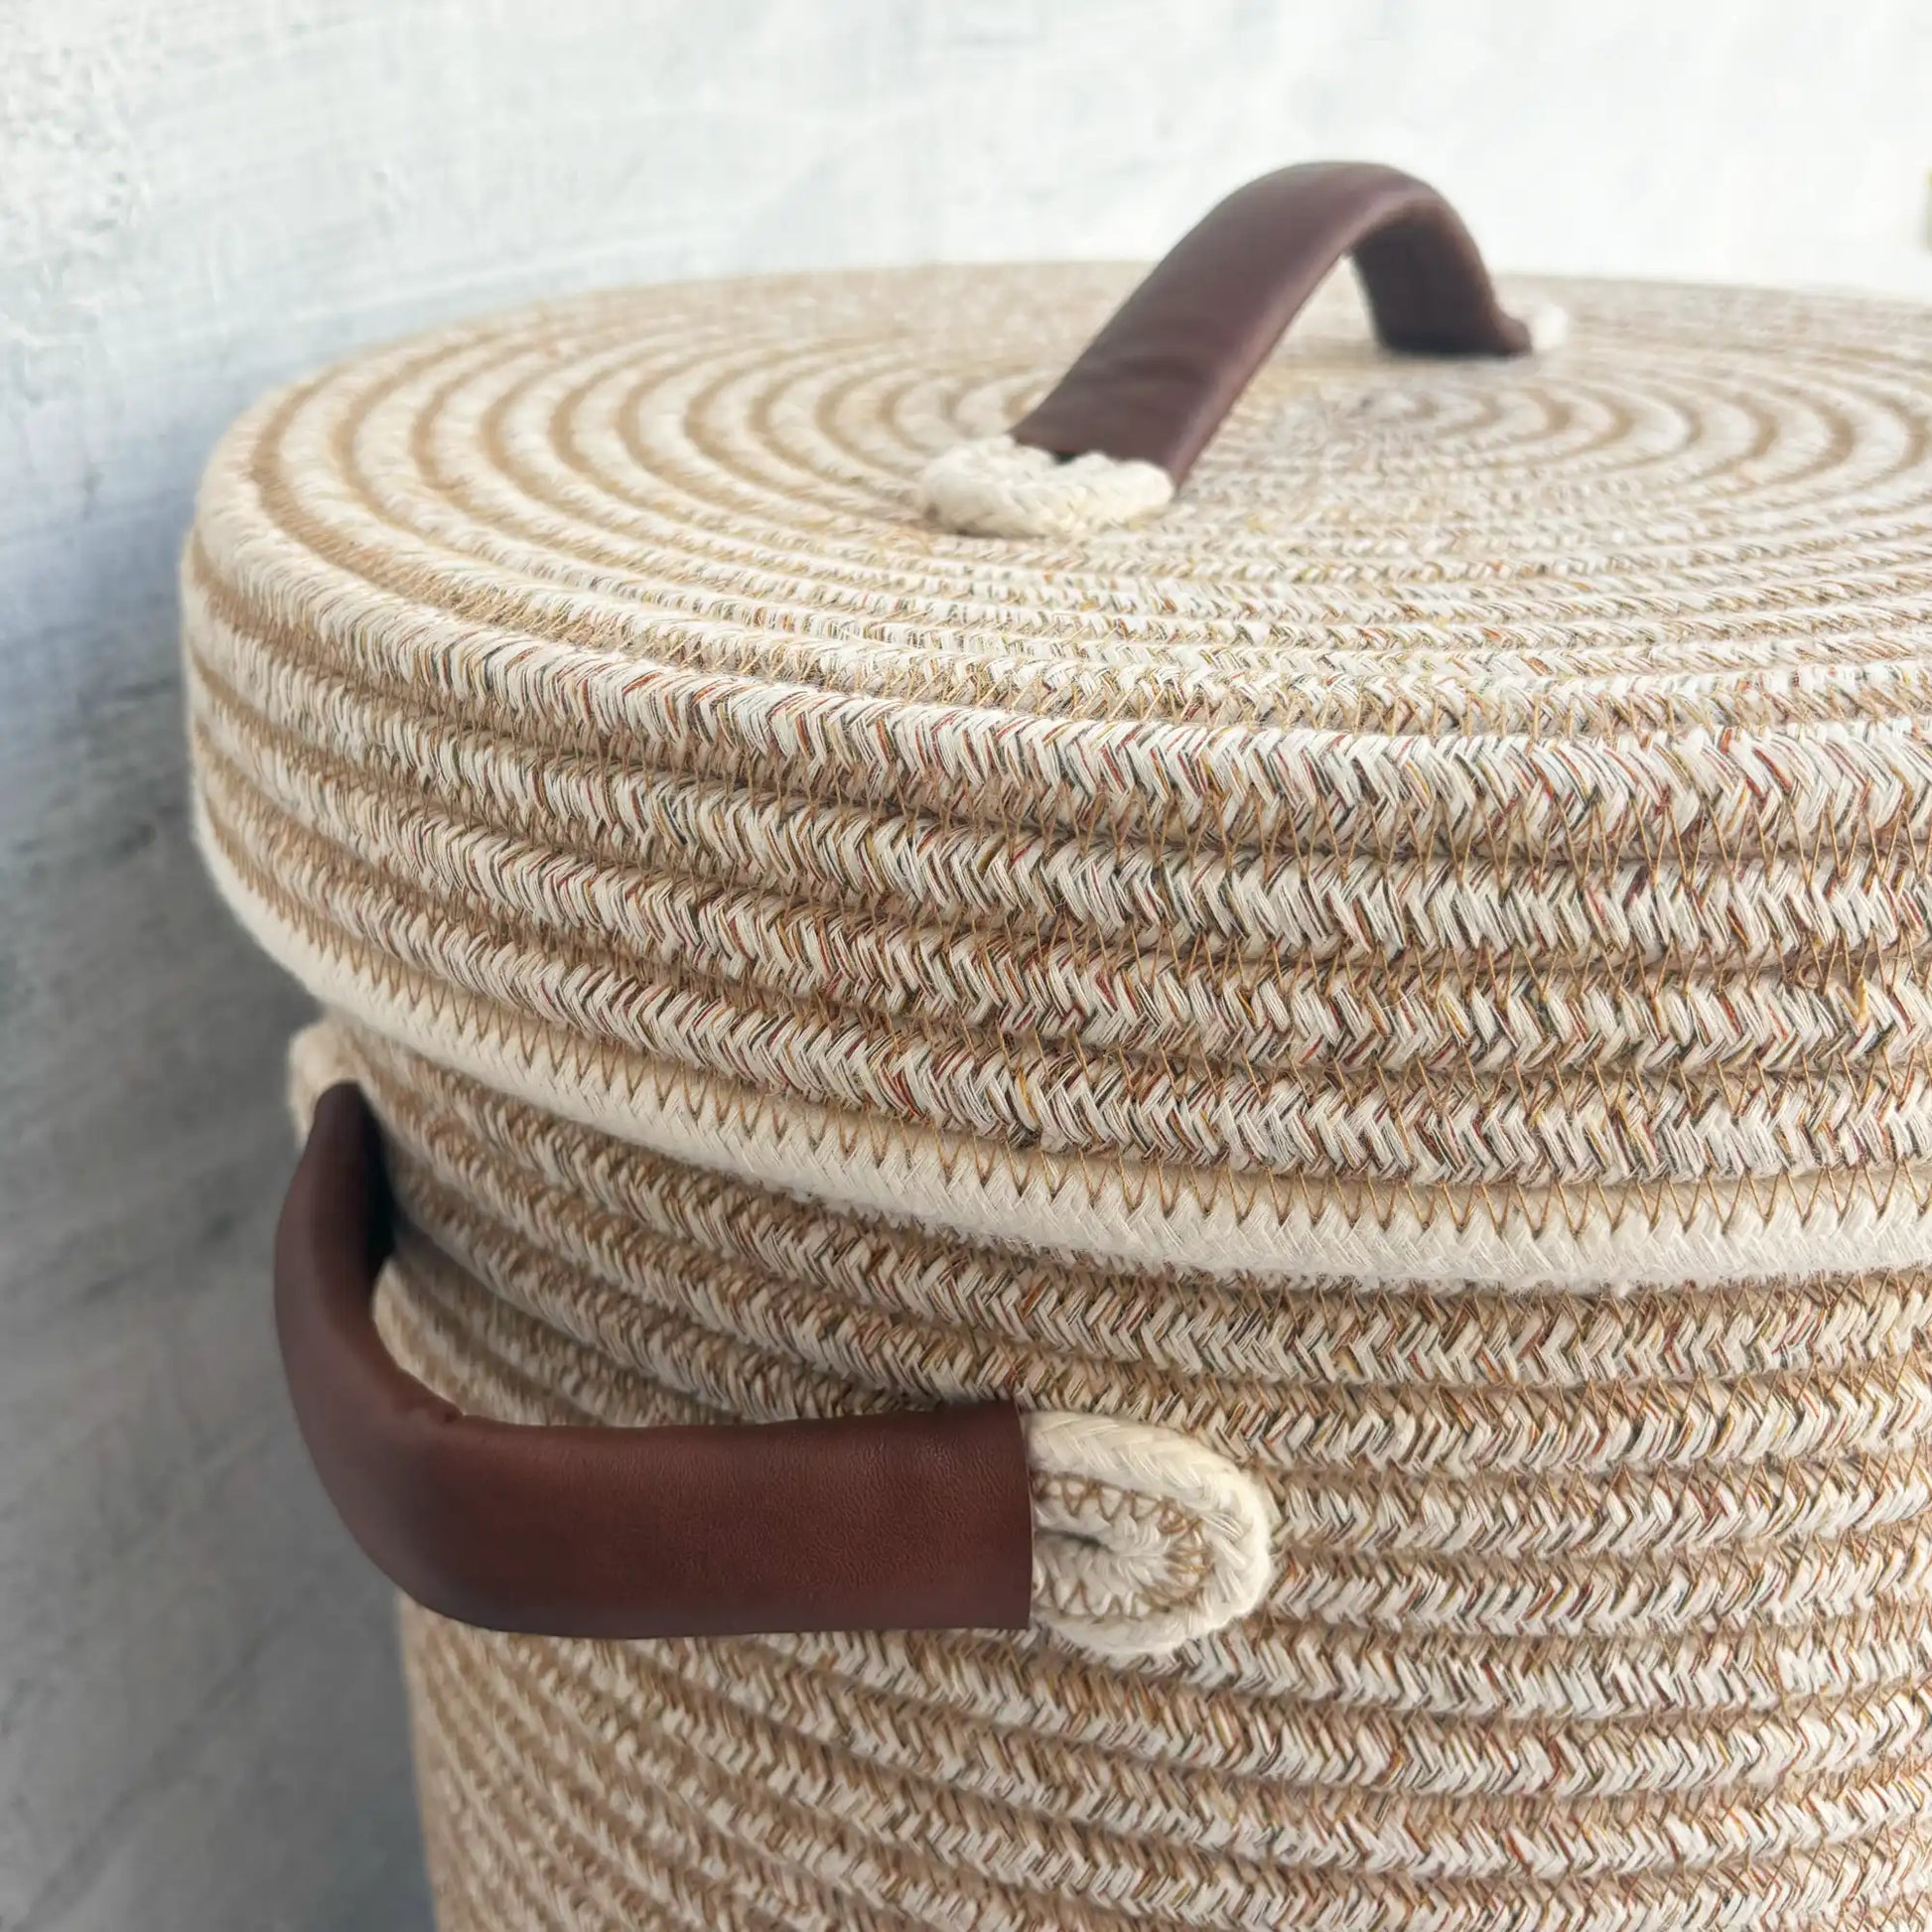 cotton laundry basket with leather handles